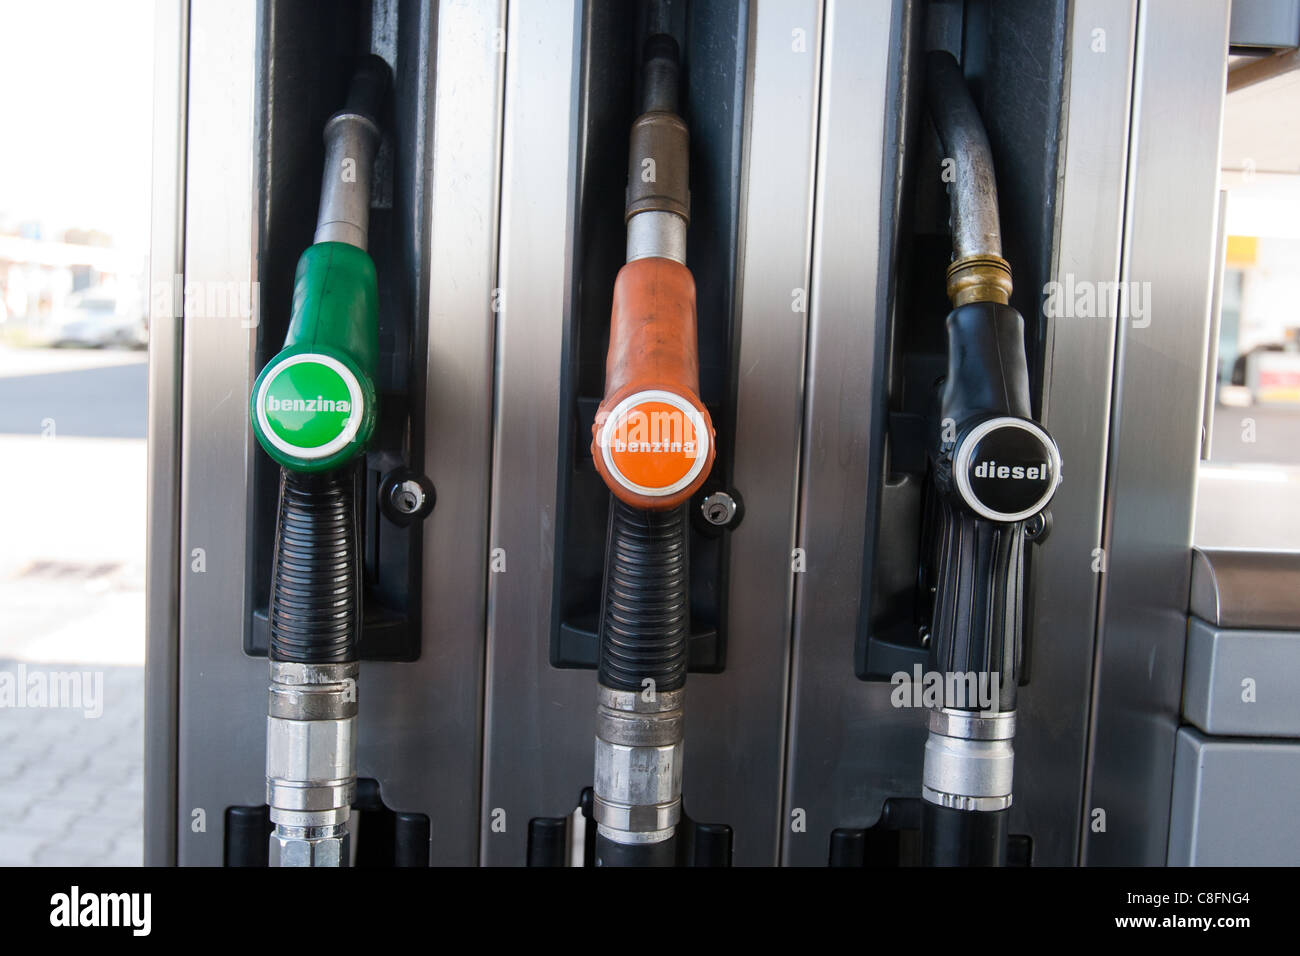 Petrol oil gas pump nozzles at a service station close up Italy Stock Photo